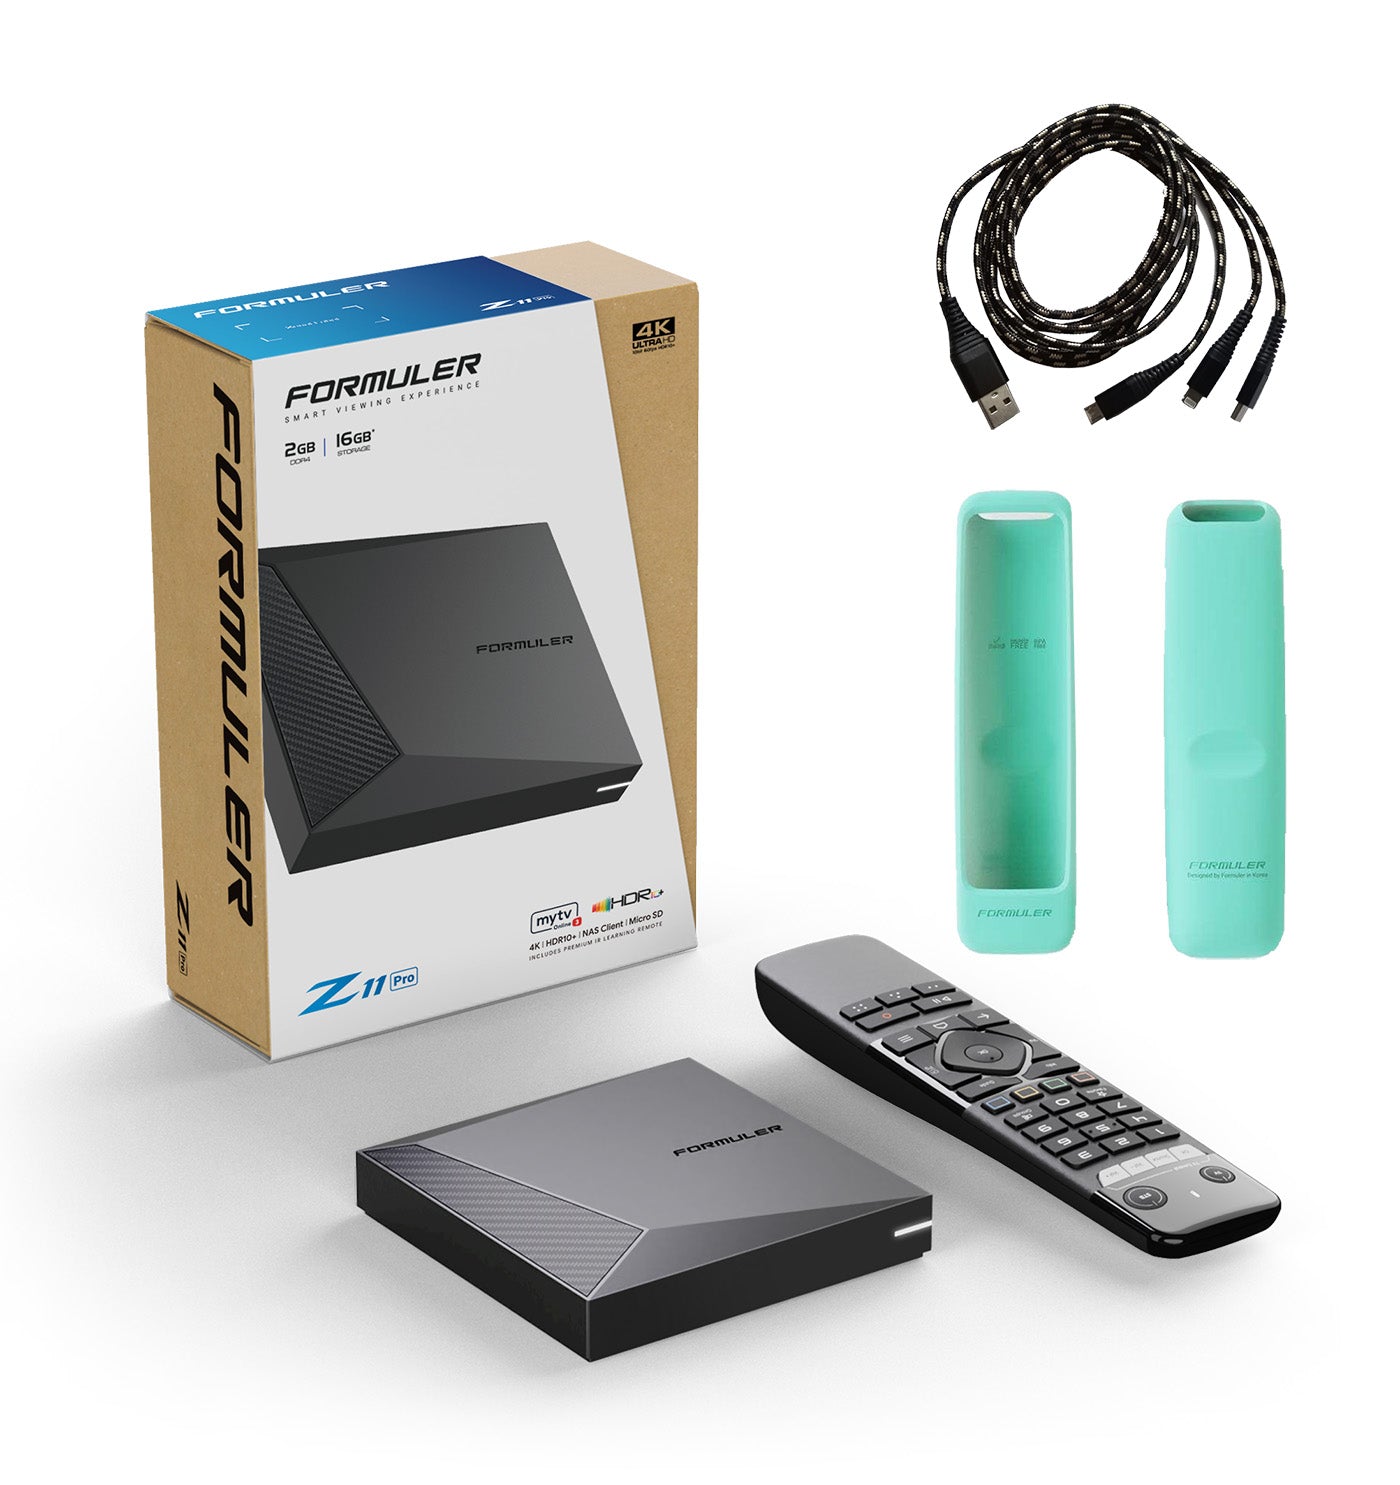 Formuler Z11 Pro + FREE ACCESSORY: 1x Turquoise Remote Cover + 1x 3 in 1 USB cable